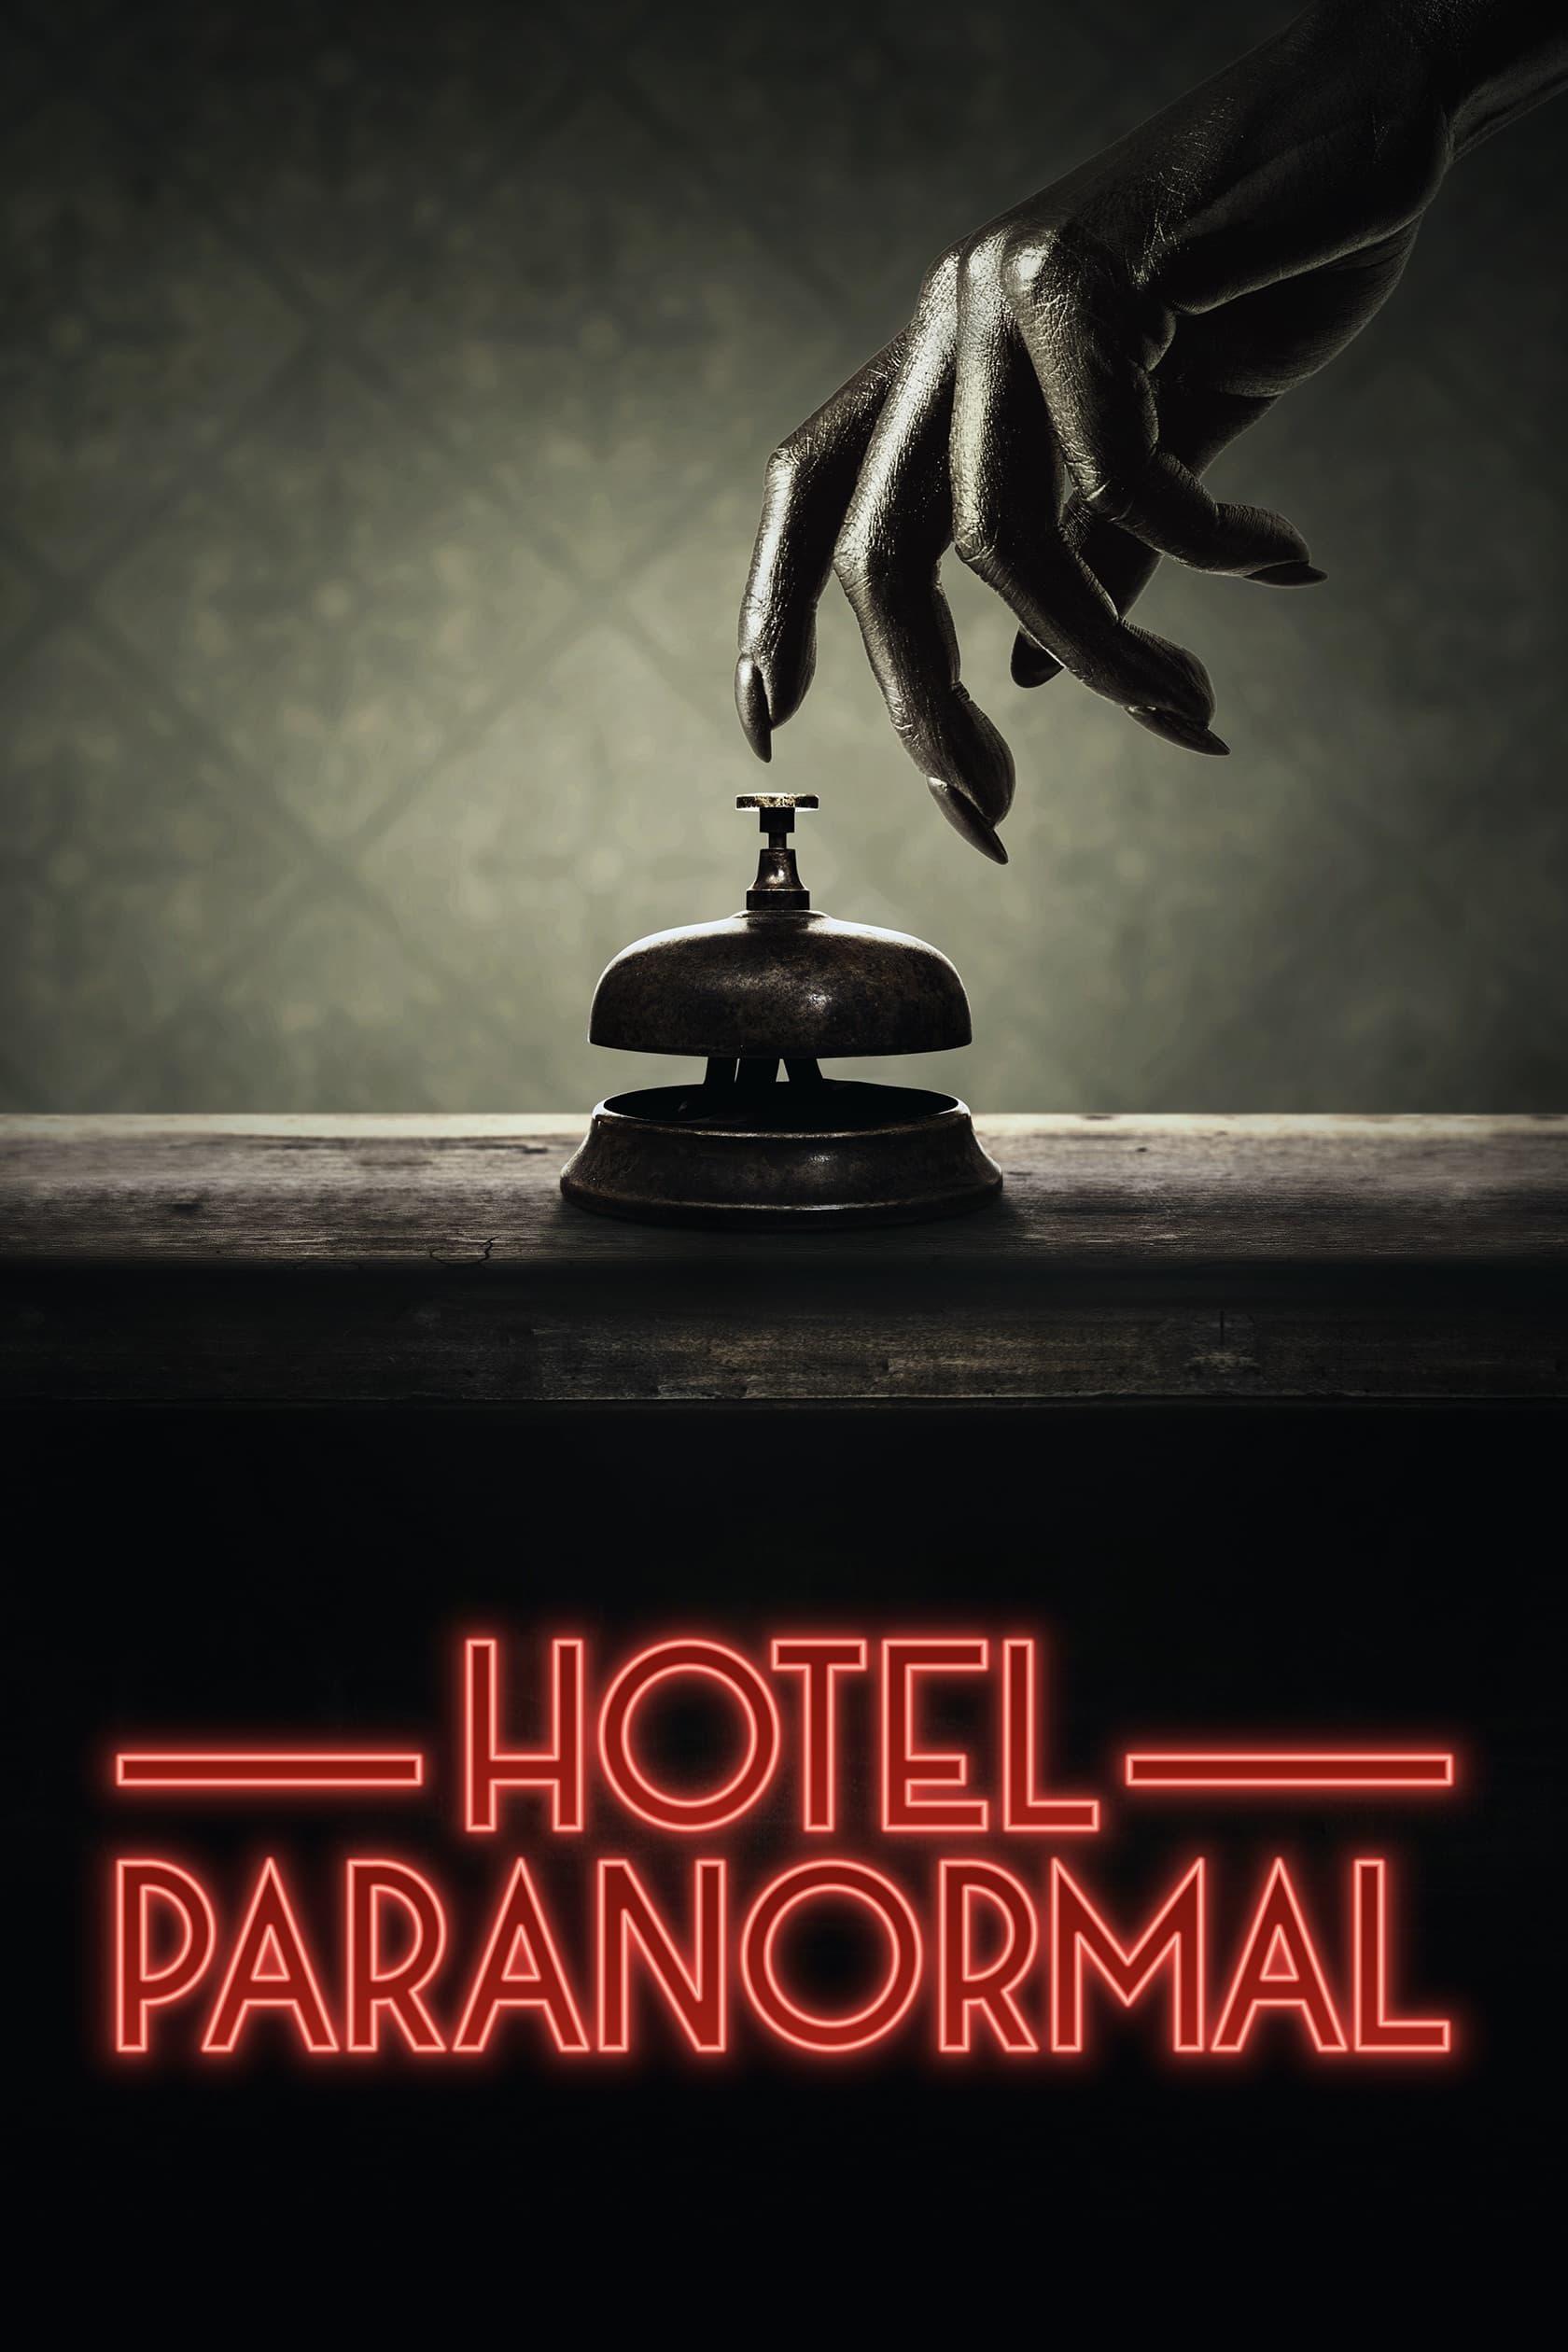 Hotel Paranormal poster